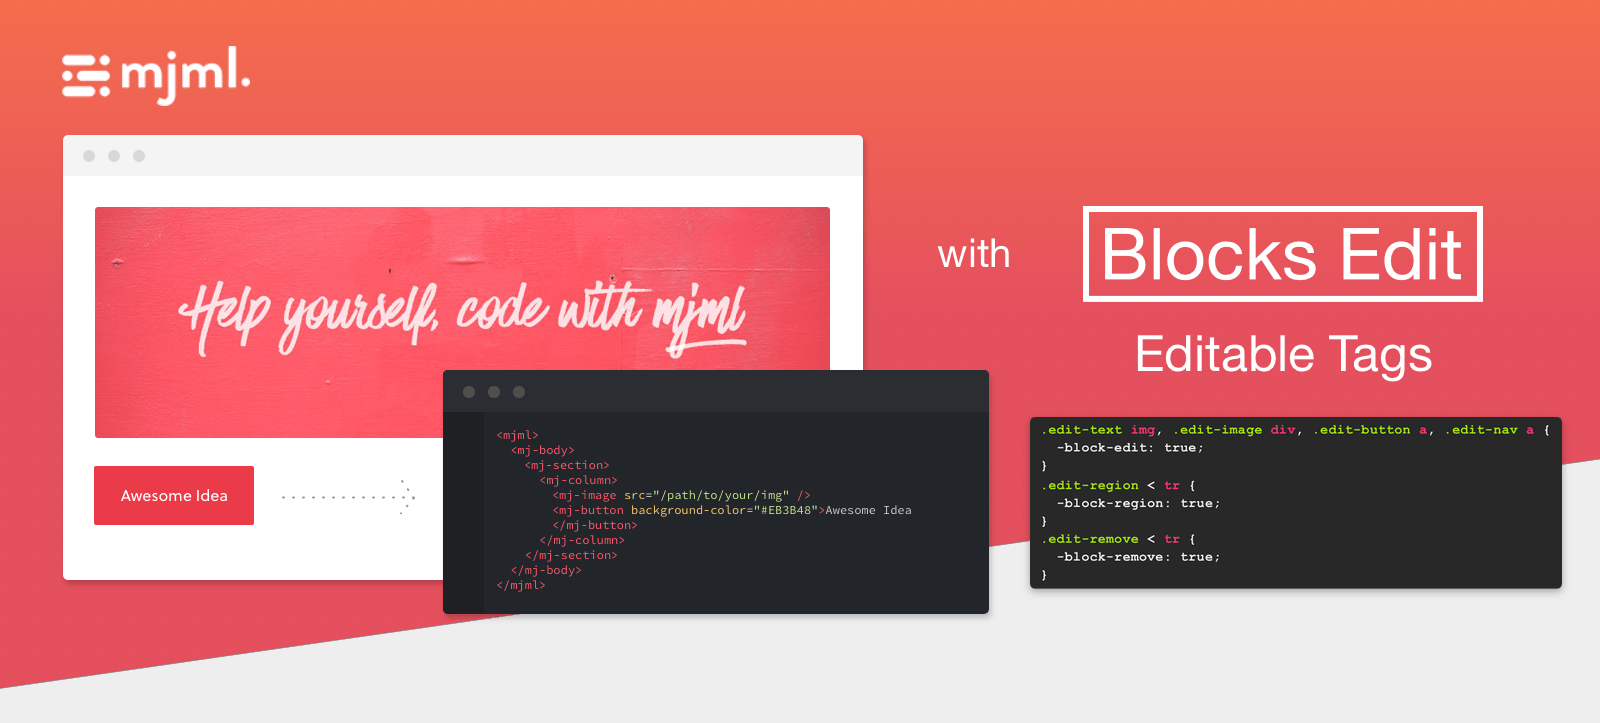 How-to: Using Blocks Edit tags in MJML email templates